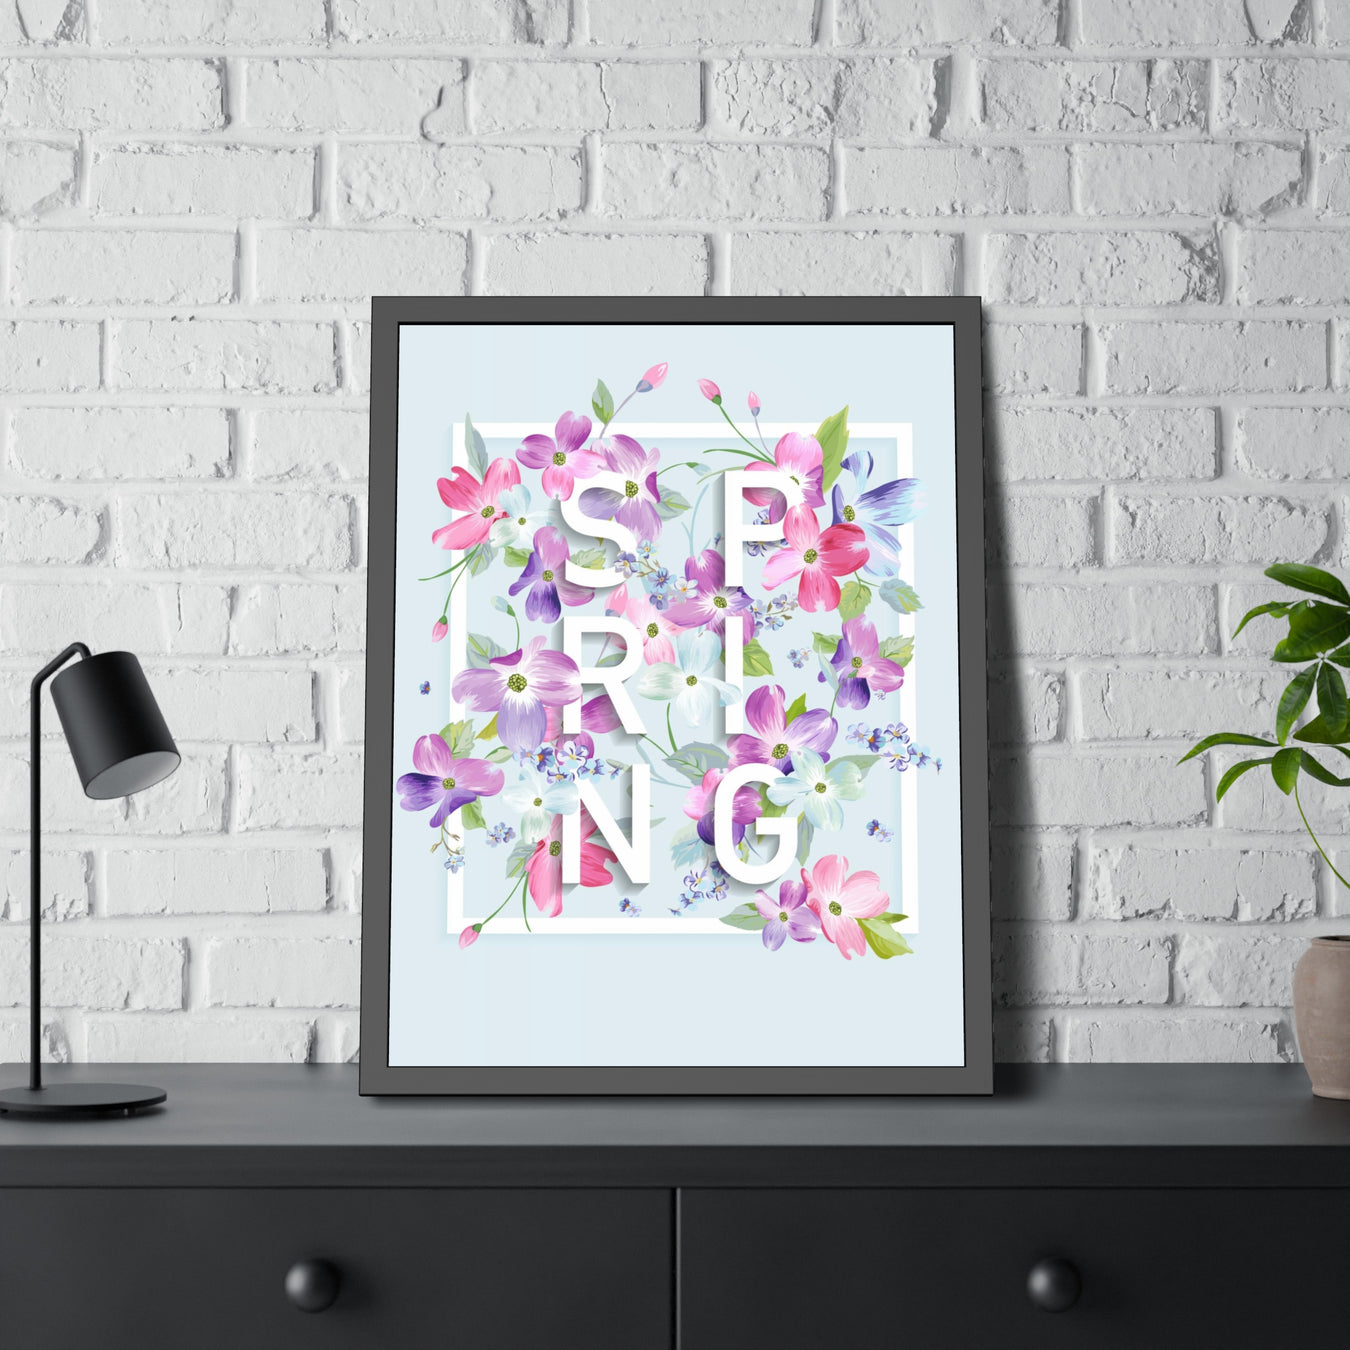 Spring Framed Paper Posters: Elevate Your Space with Timeless Artistry